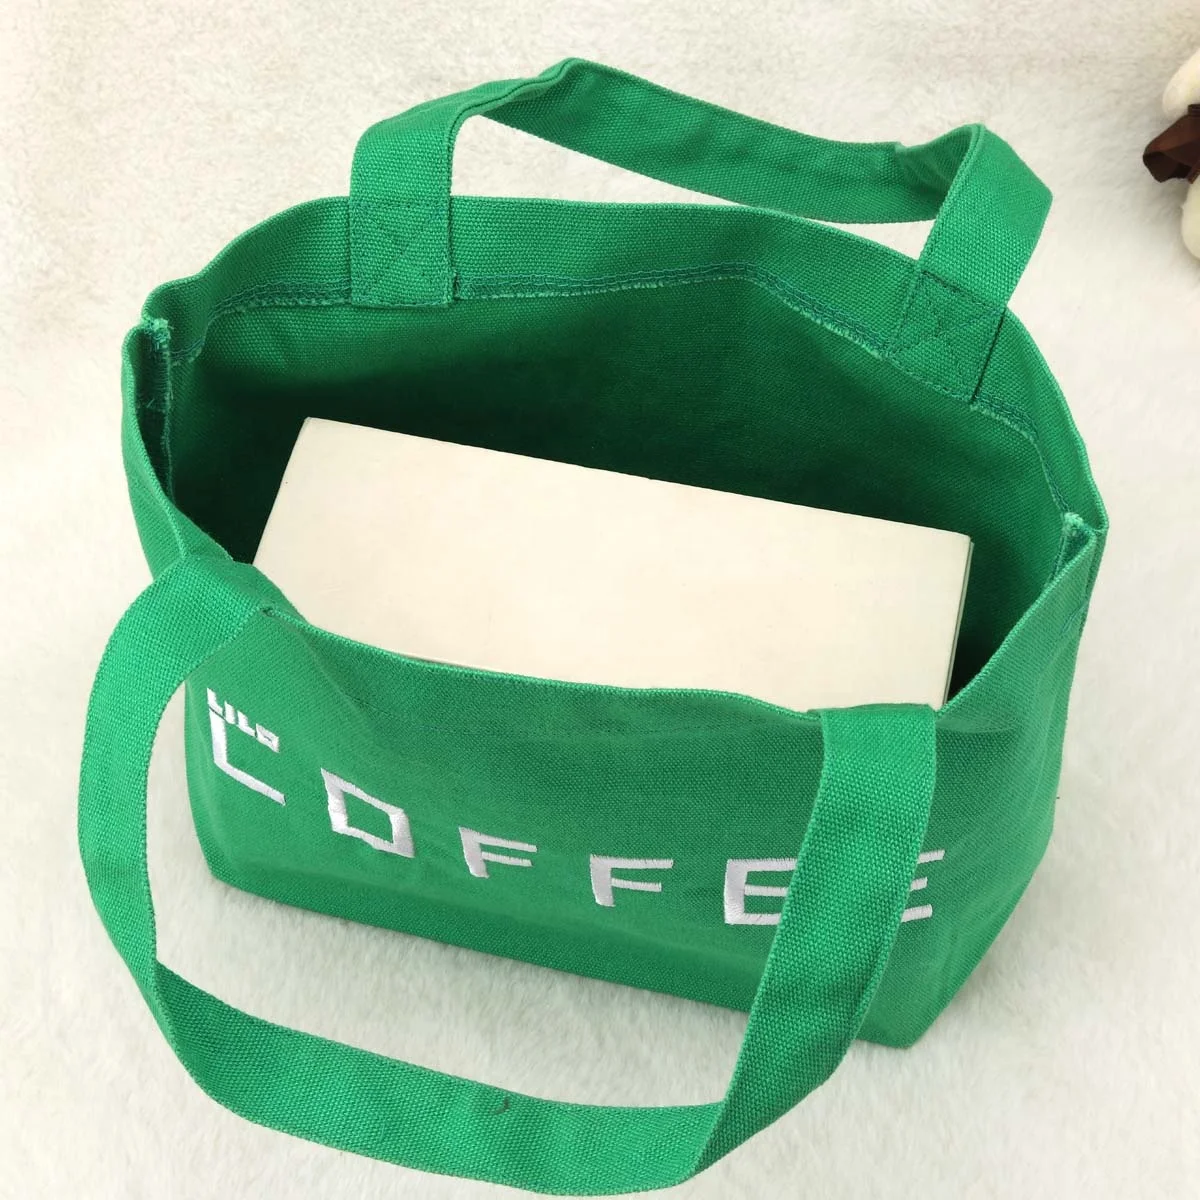 Natural Recyclable Square Bottom Canvas Handle Coffee Lunch Bag Promotion Custom Logo Printed Cotton Tote Shopping Bag